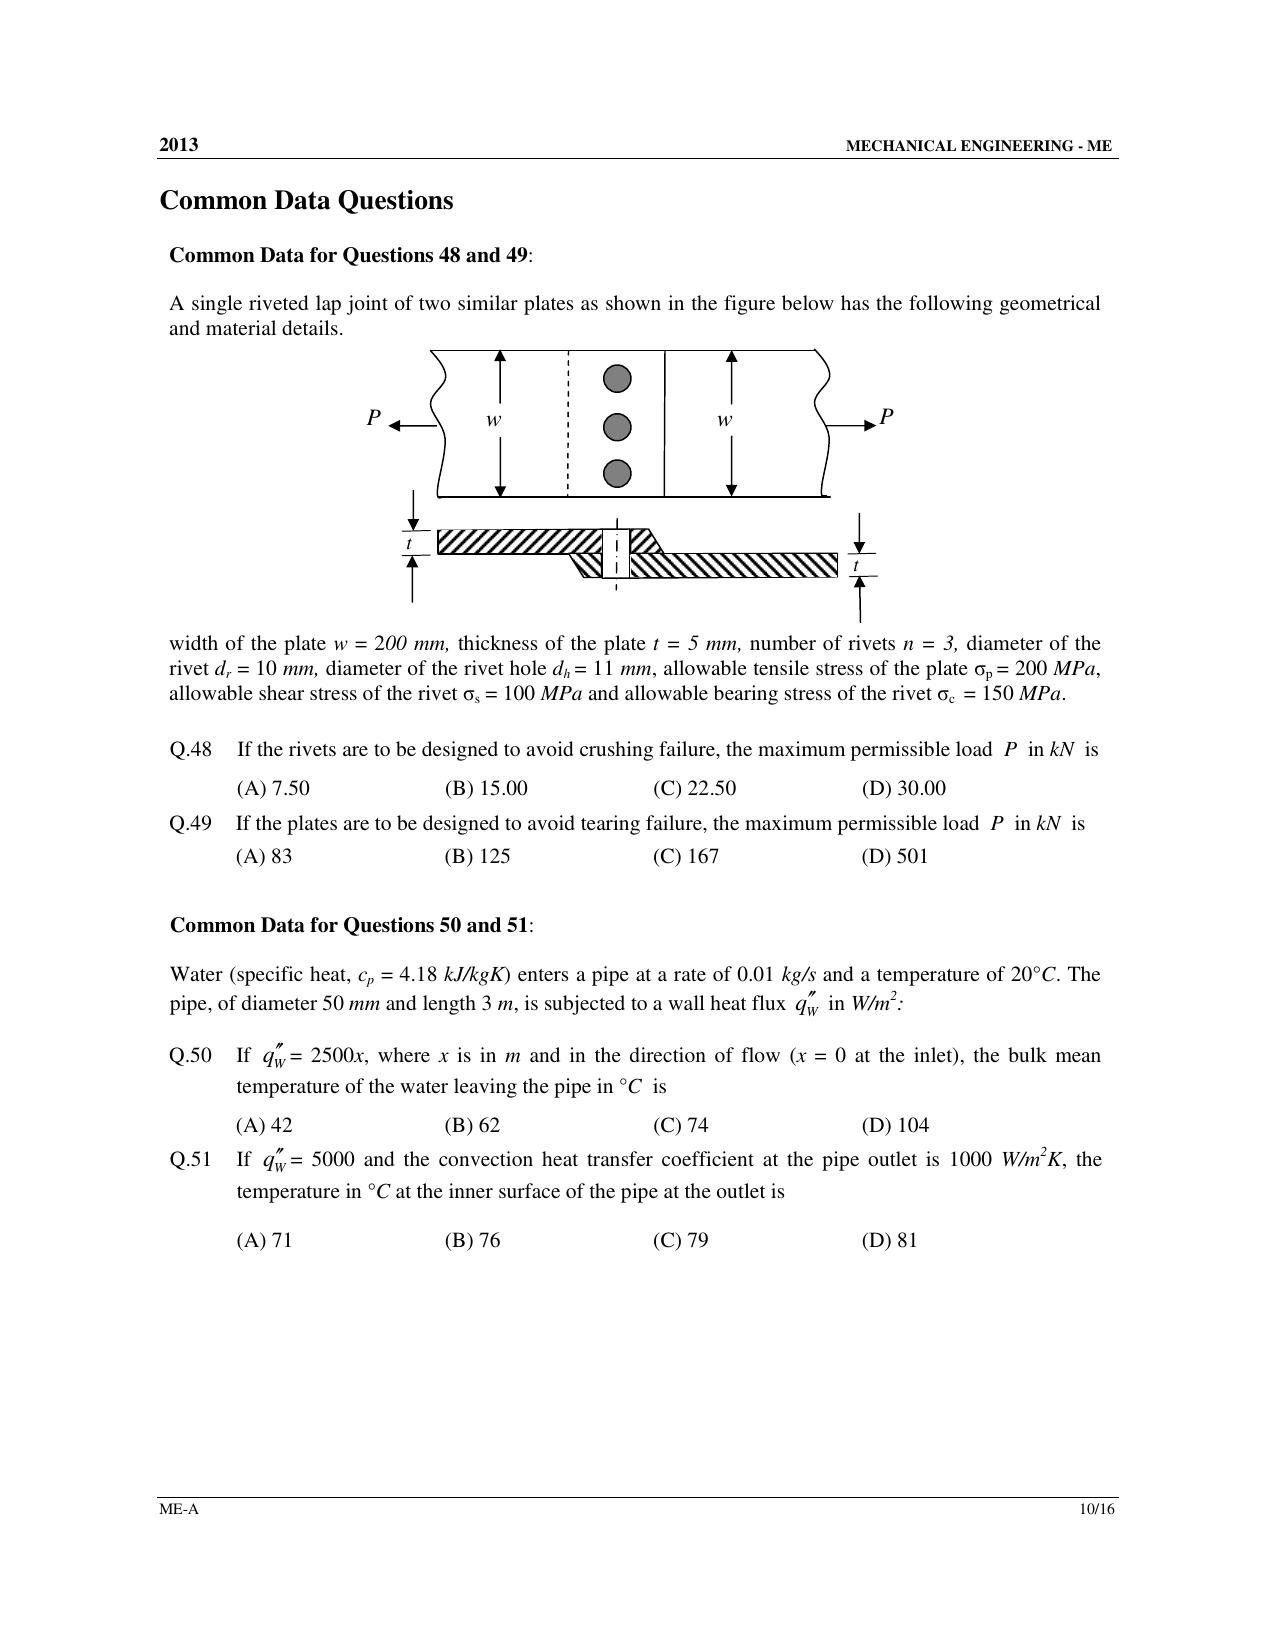 GATE 2013 Mechanical Engineering (ME) Question Paper with Answer Key - Page 11